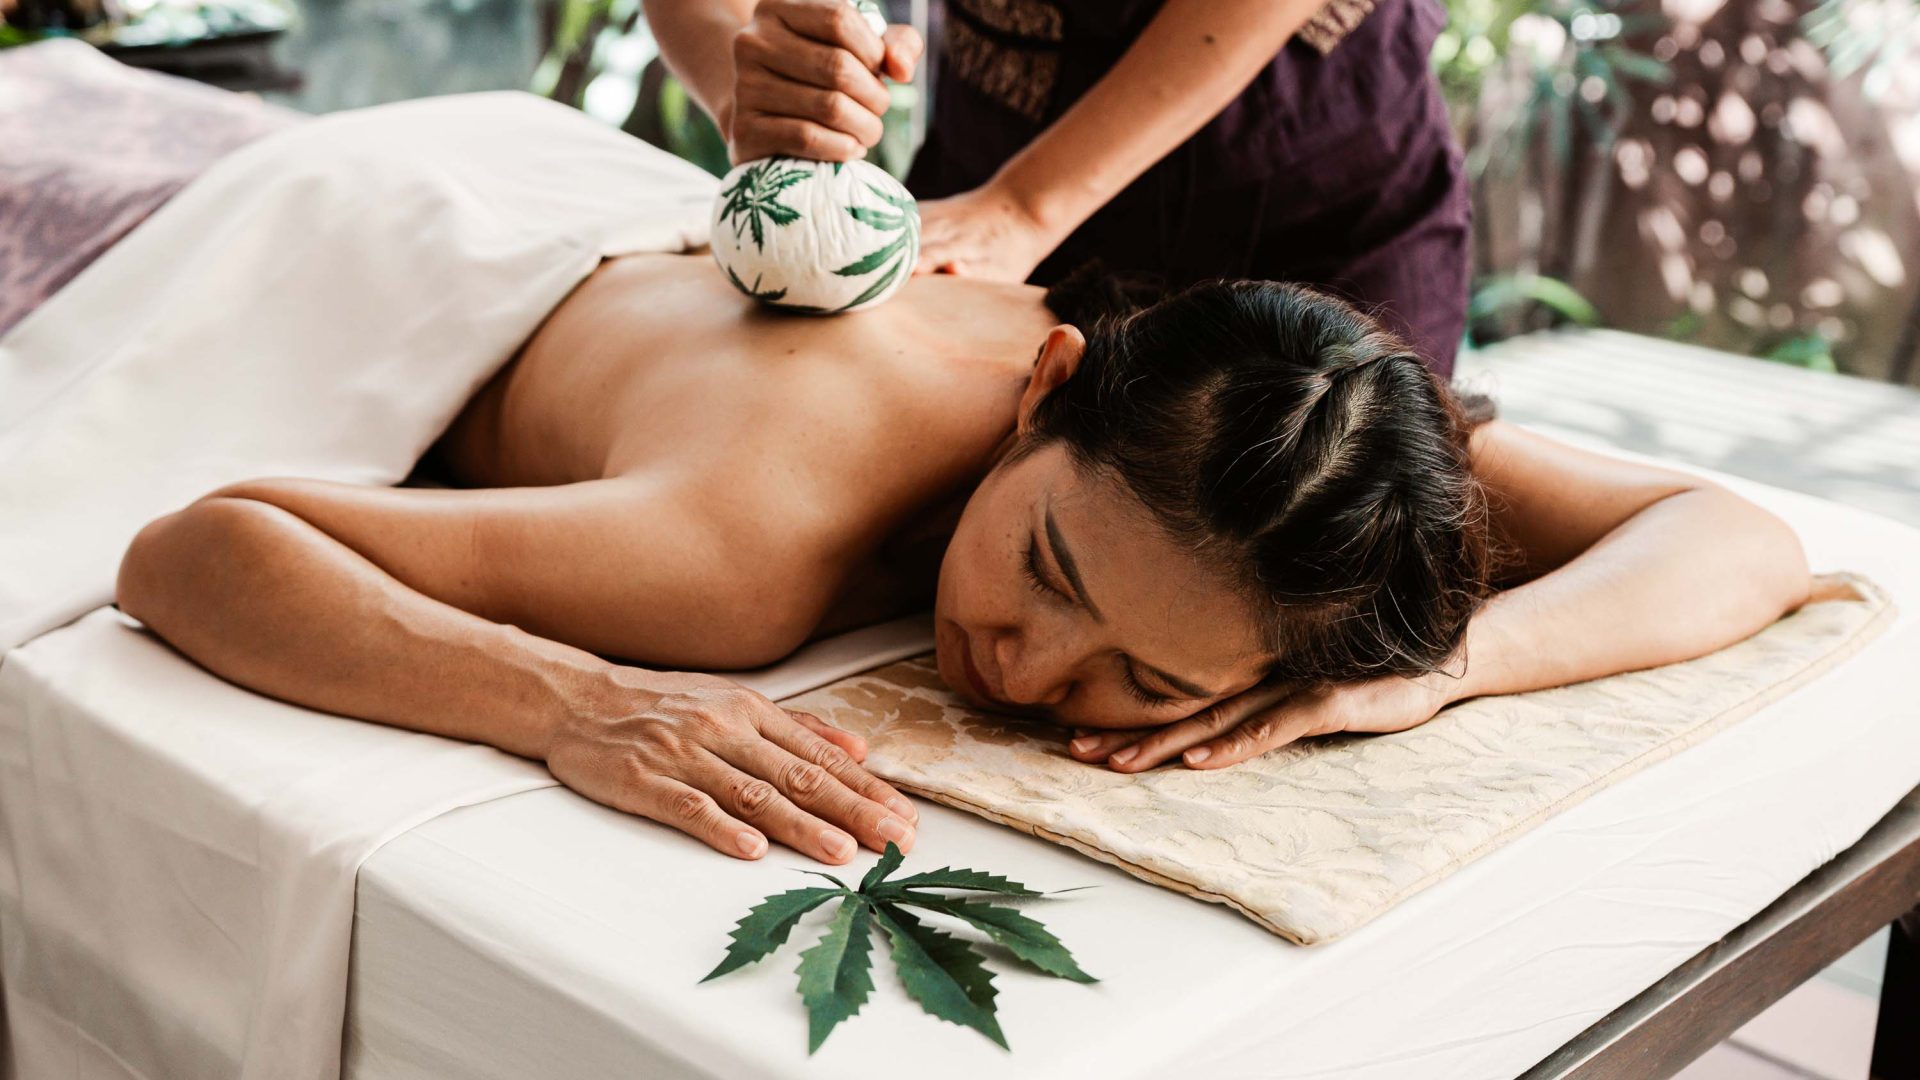 A woman gets a cannabis treatment on her back.